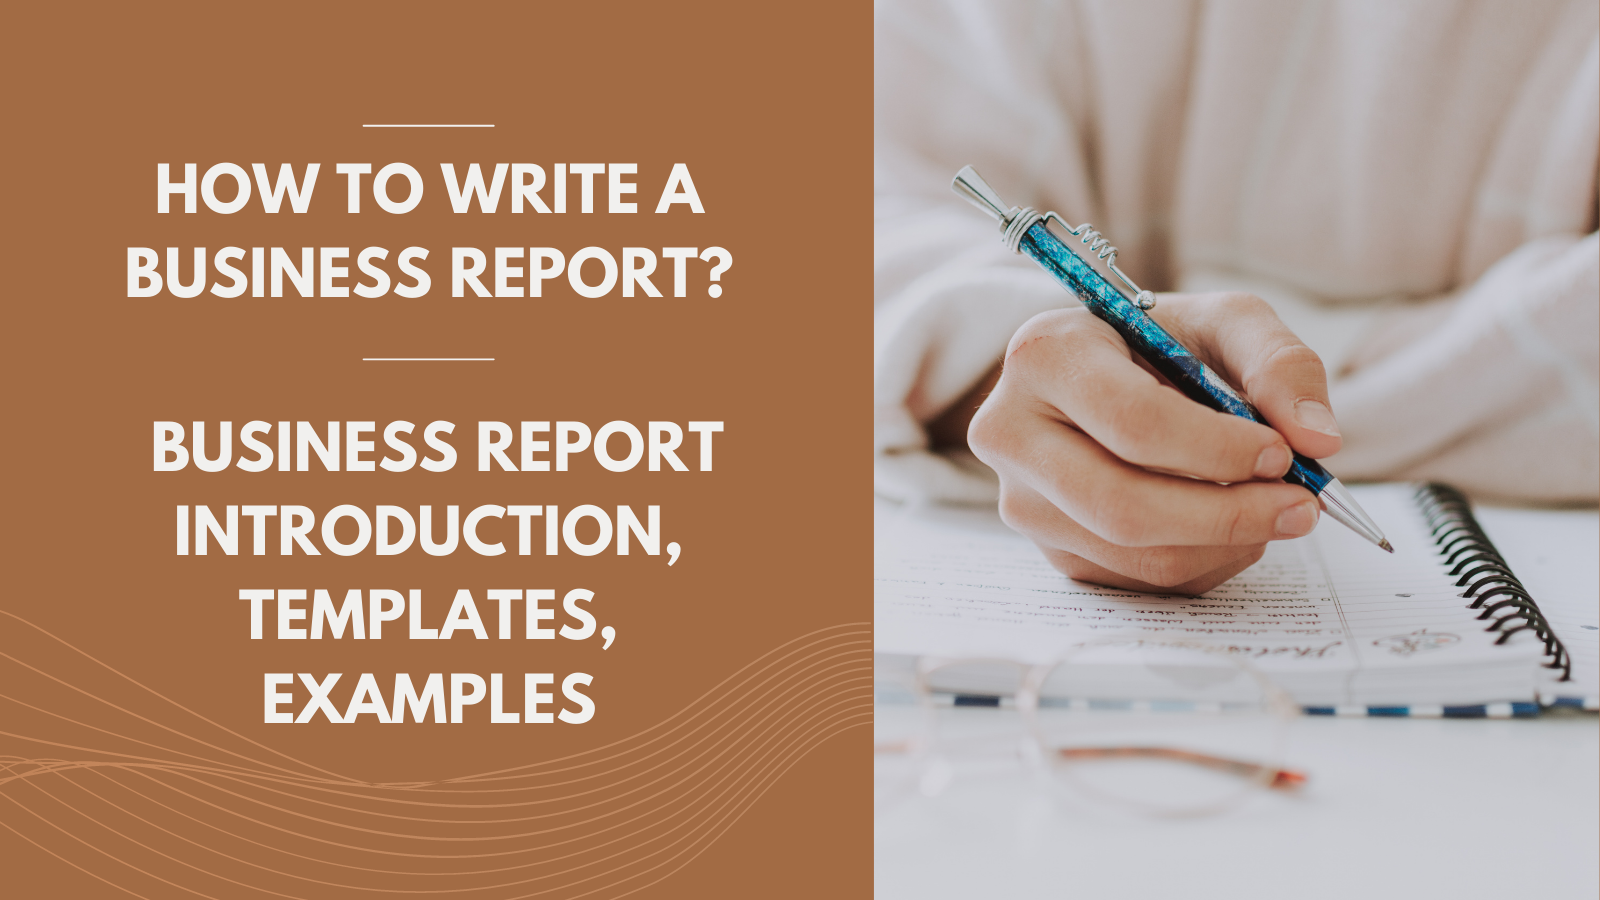 How to write a Business Report